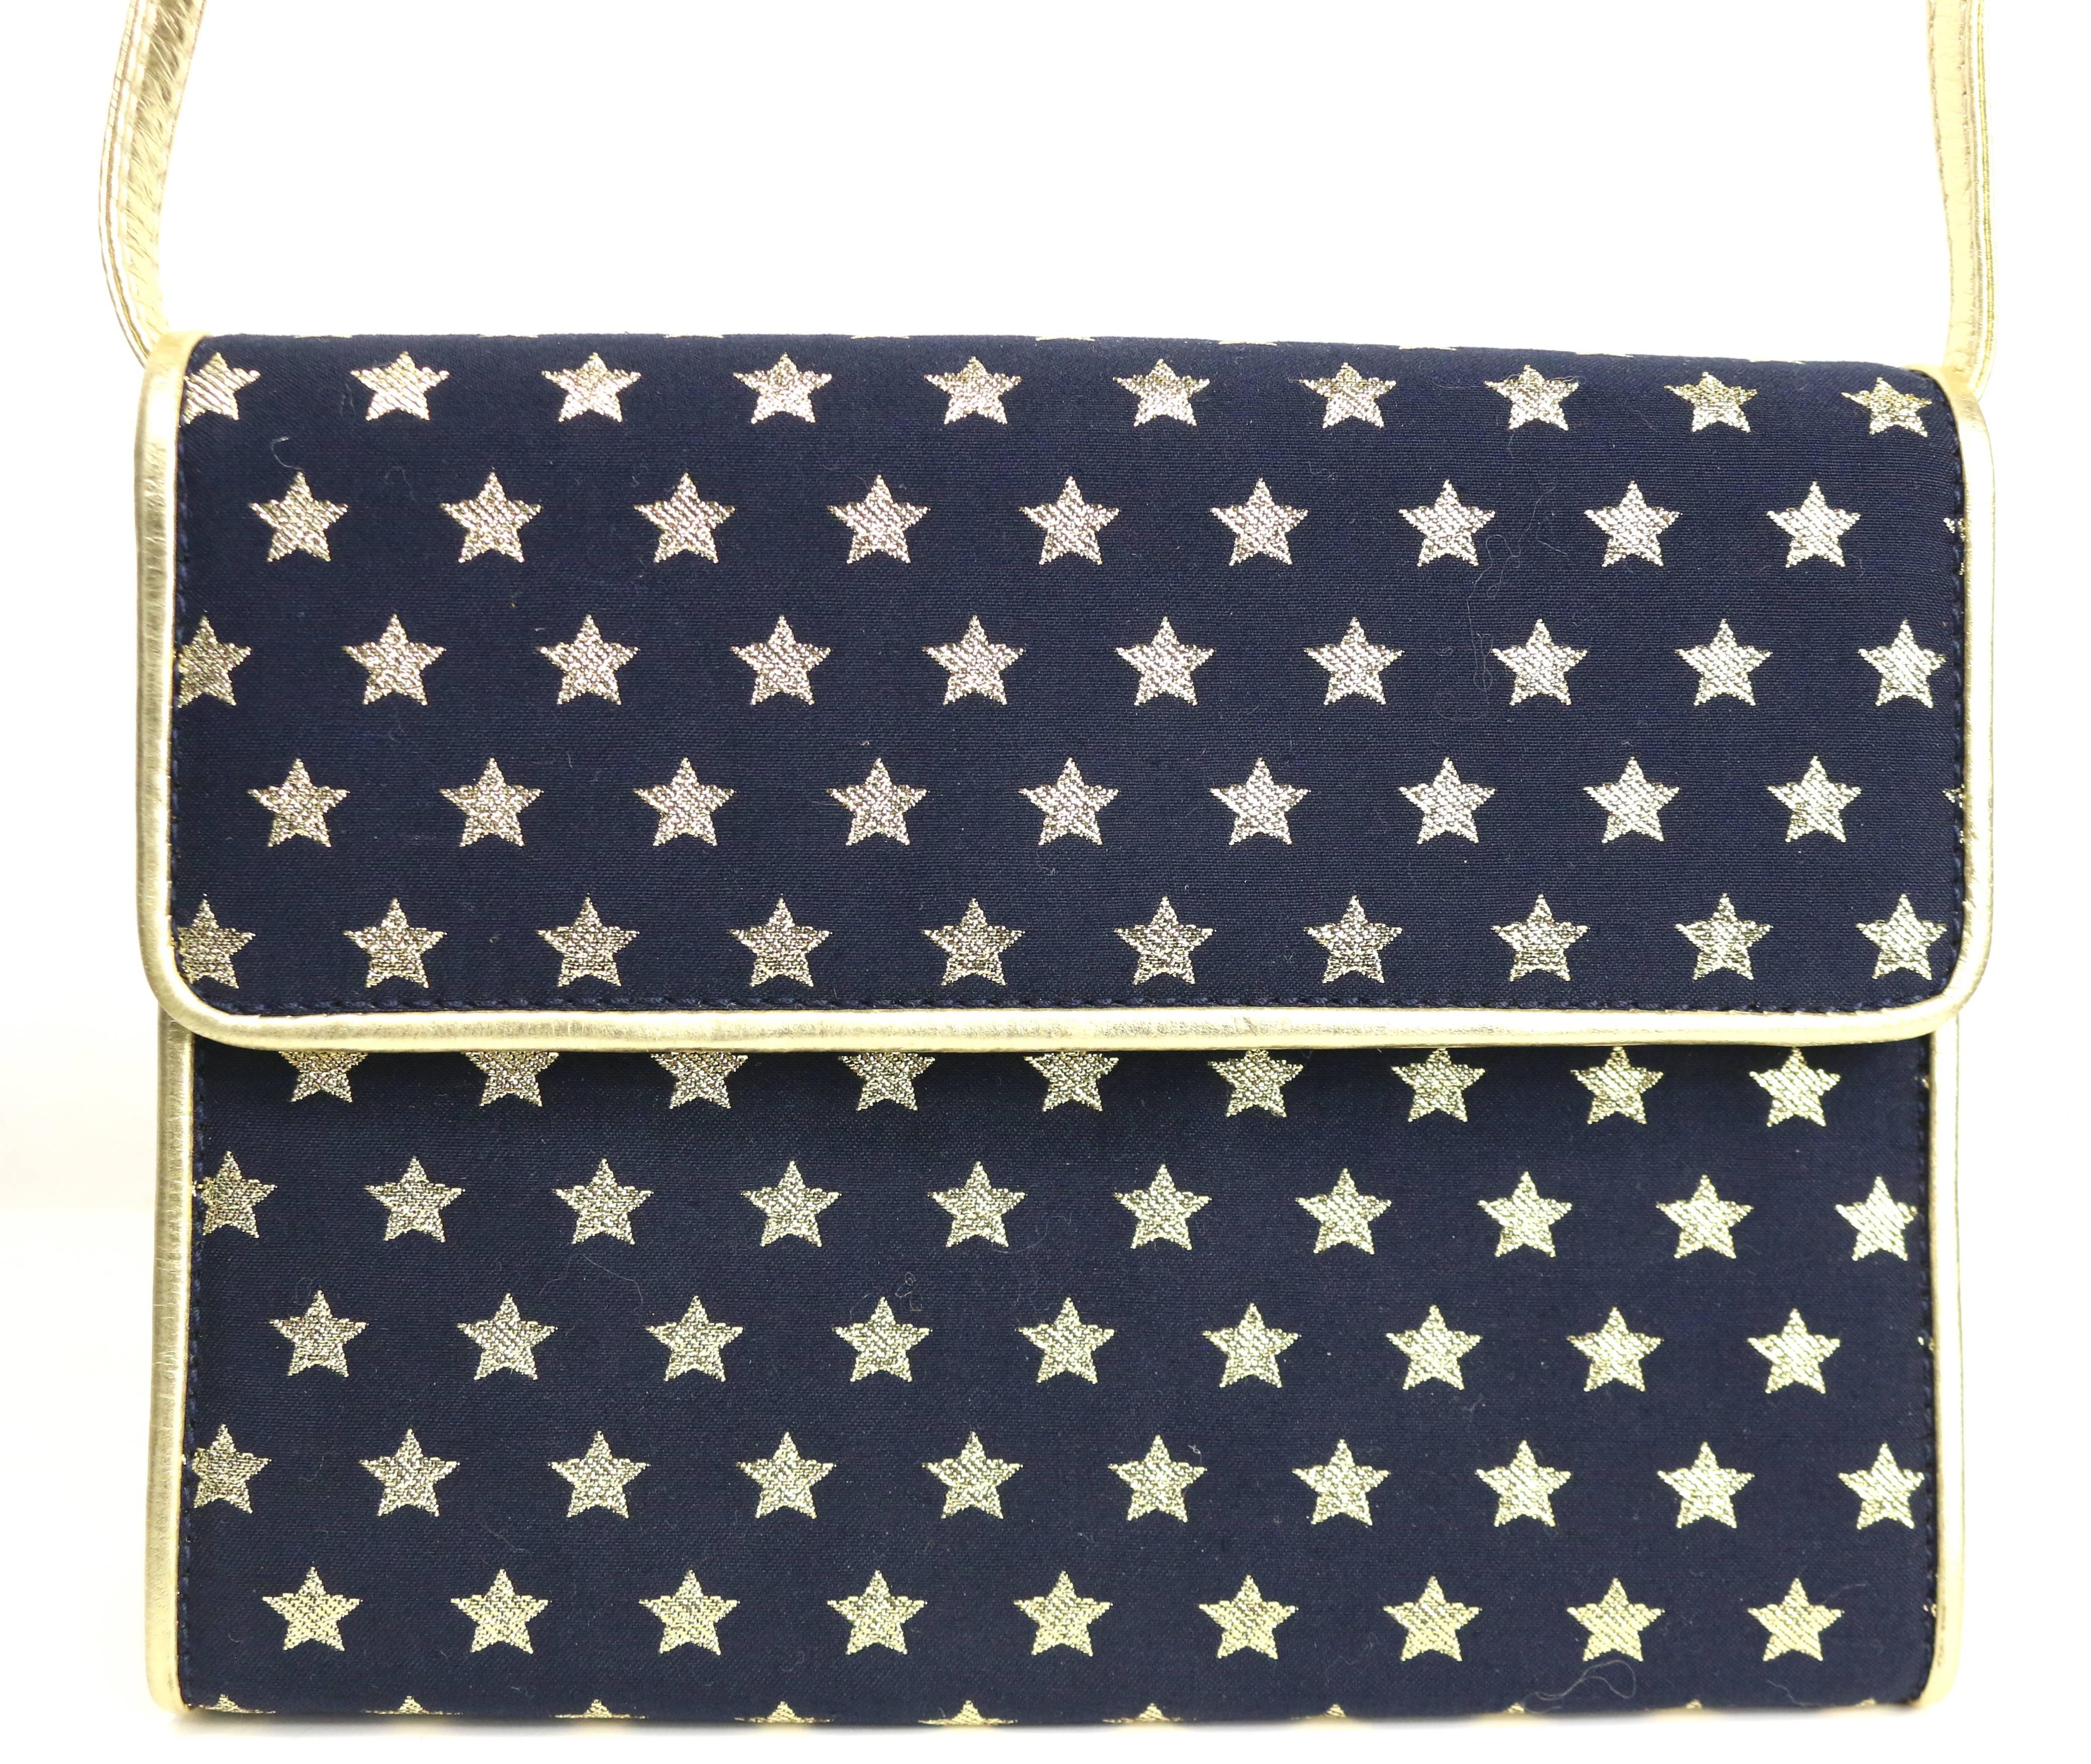 - Vintage 80s Escada dark navy with gold metallic stars shoulder bag. 

- Featuring gold metallic leather piping trim. 

- Flap with snap button closure. 

- Detachable gold metallic shoulder strap. 

- Interior zip closure. 

- Length: 7 inches.